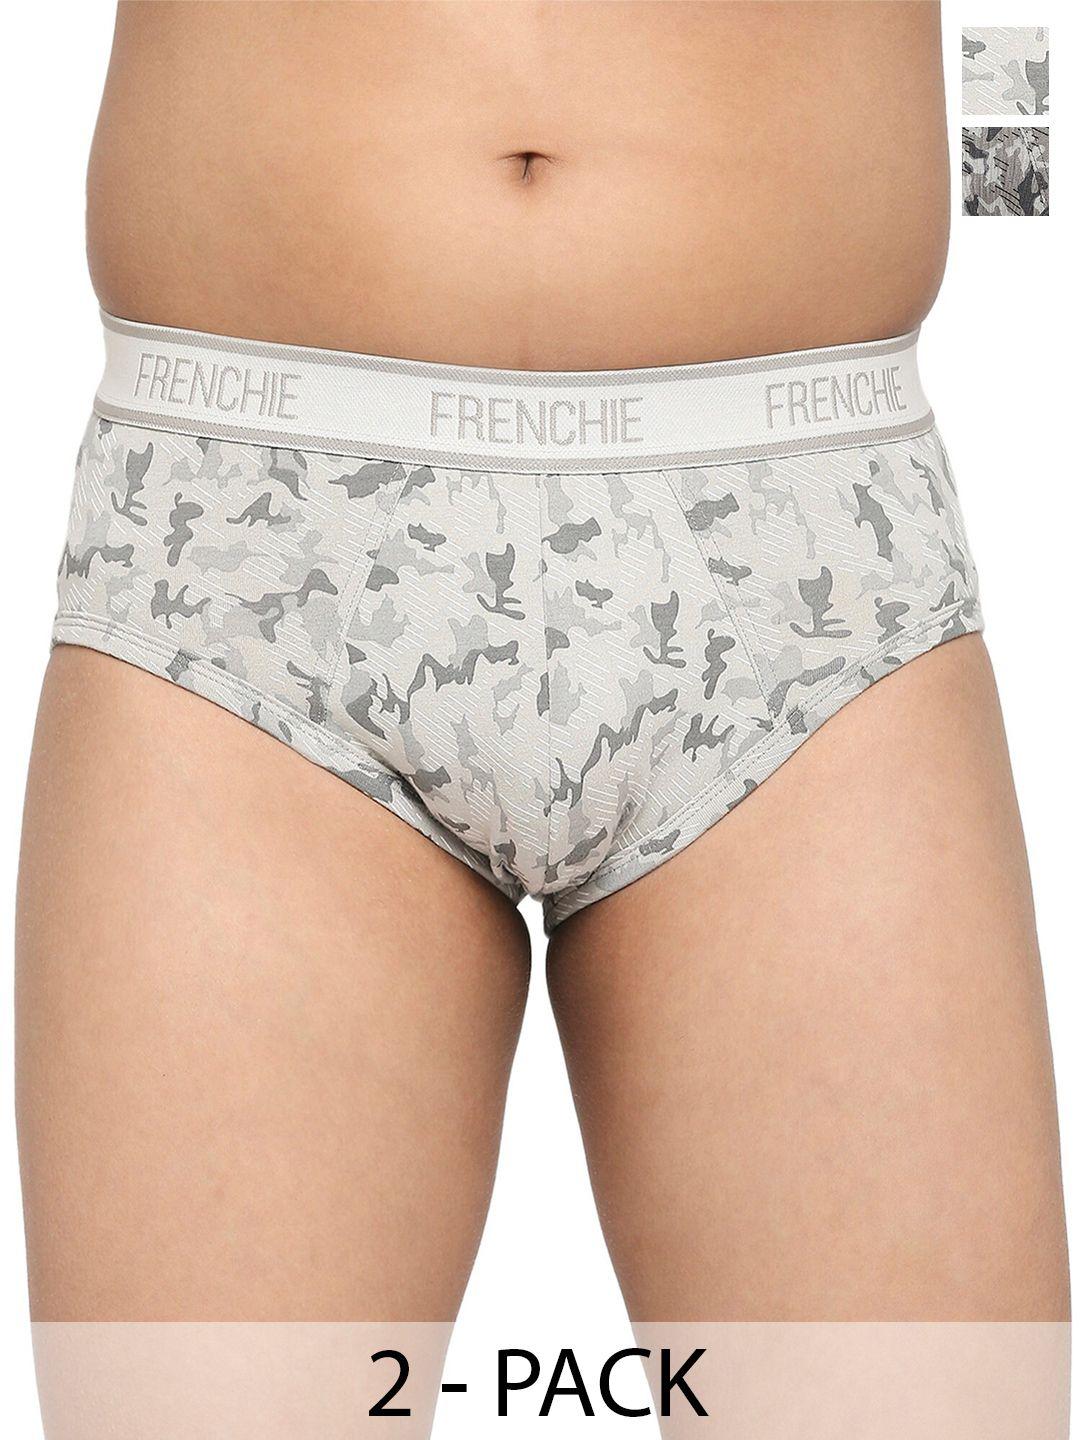 frenchie-boys-pack-of-2-printed-cotton-hipster-briefs-fr-bf-u1904-1x5-gray-lgray-xs